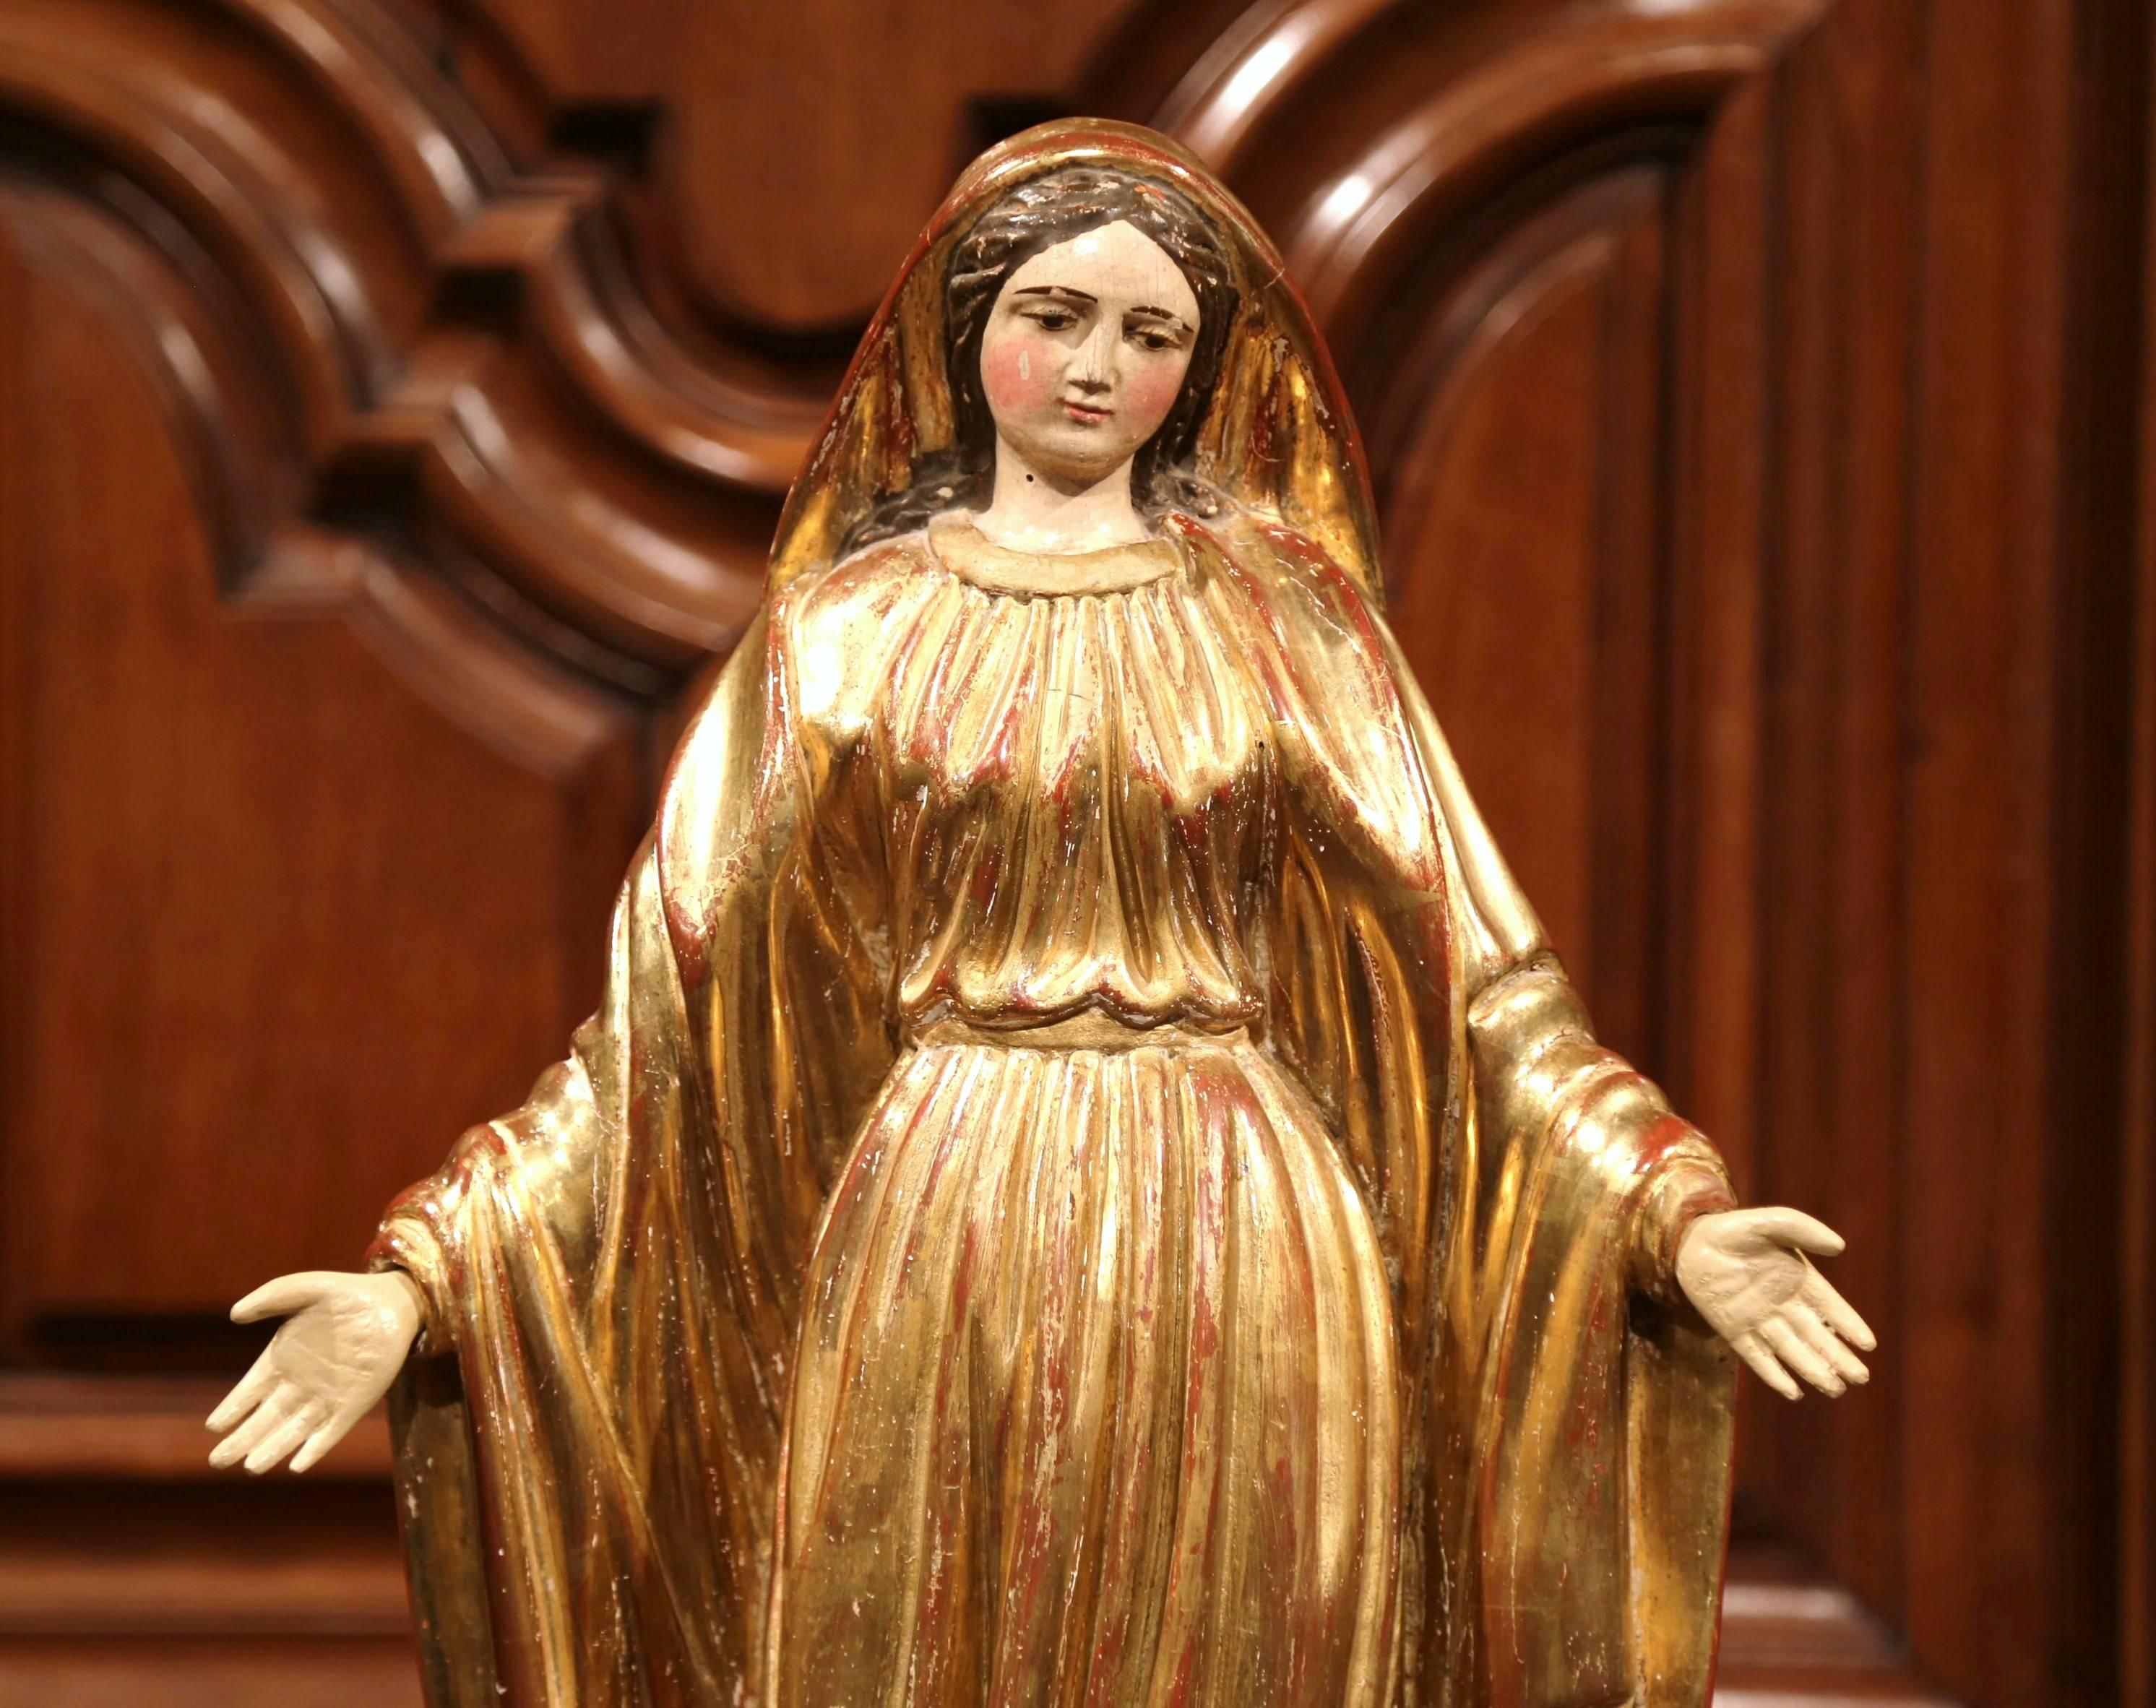 This beautiful, antique sculpture of the Virgin Mary was created in France, circa 1780. Embellished with gold leaf and polychrome finish, the Classic religious figure is beautifully ornate and has wonderful details throughout her robe, face, hair